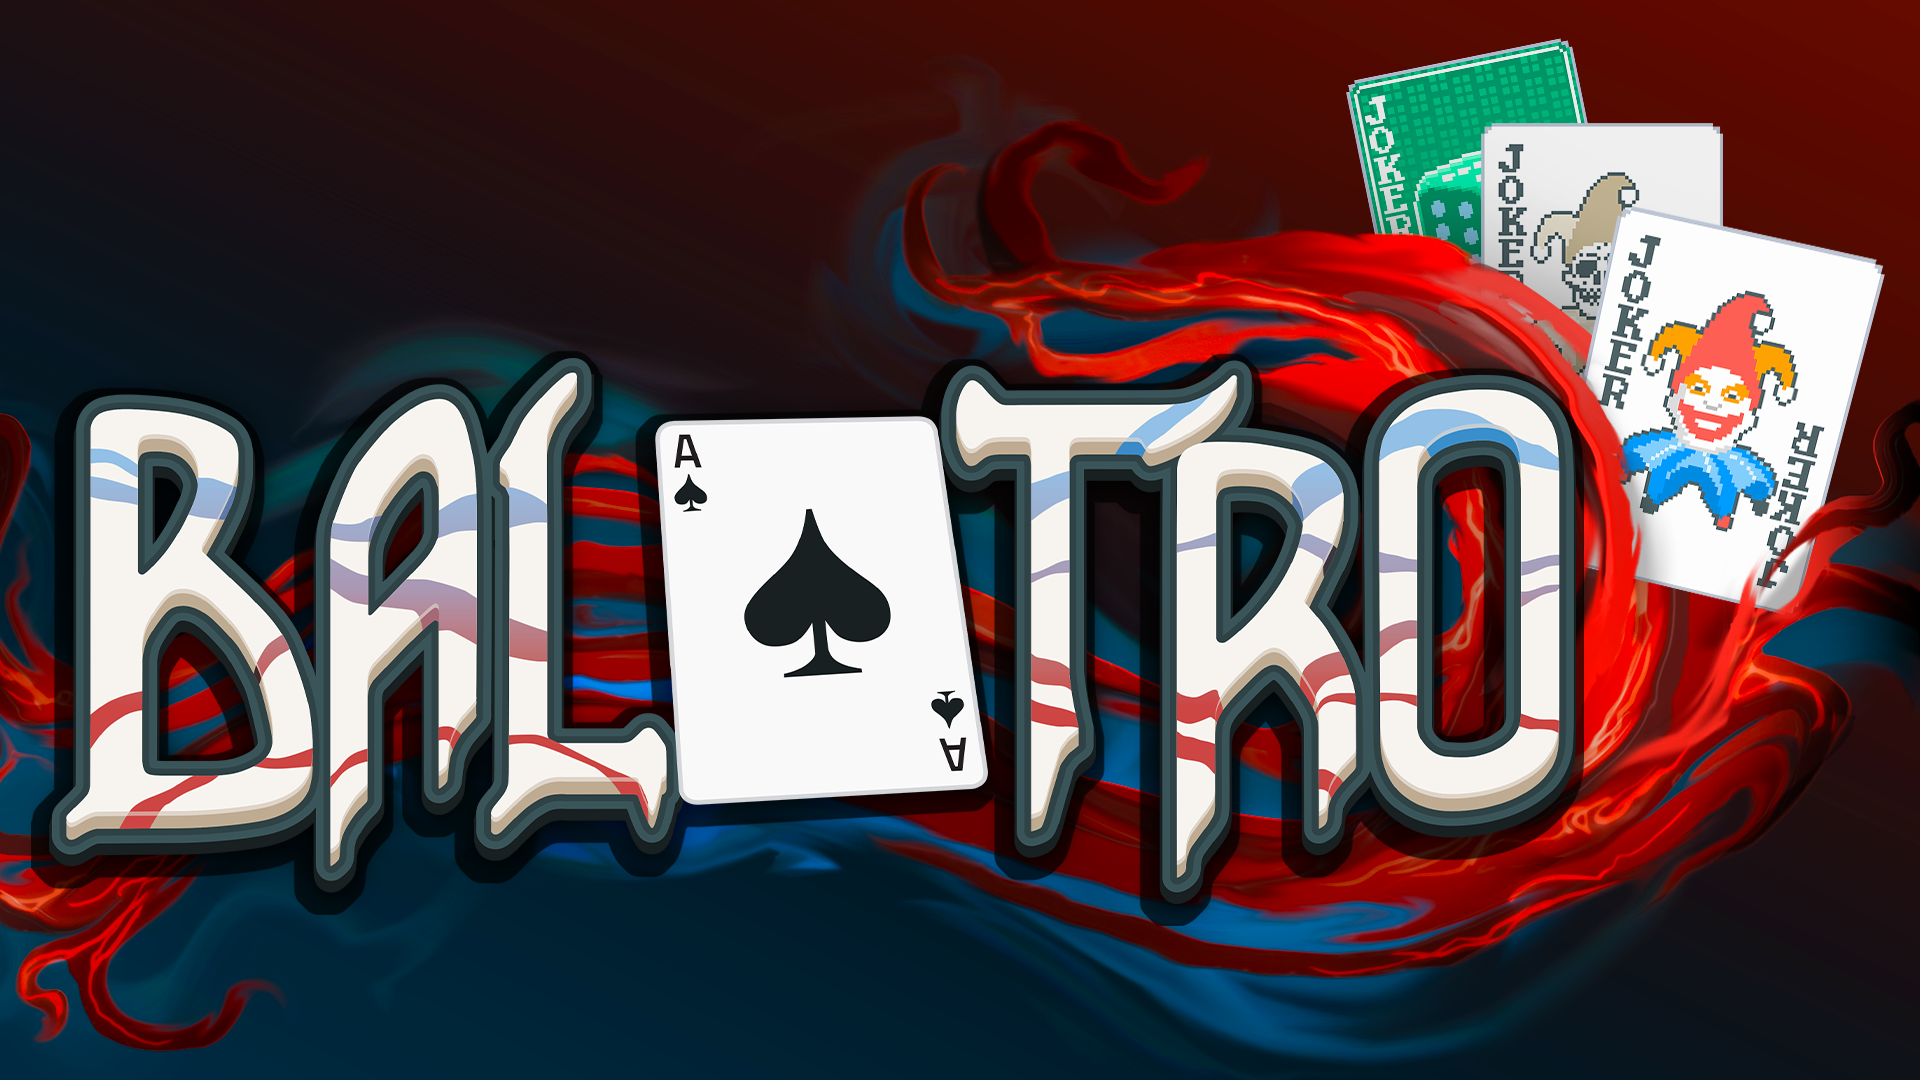 Logo for the Balatoro game engulfed in red and blue pixelated flames, and a set of "joker cards"